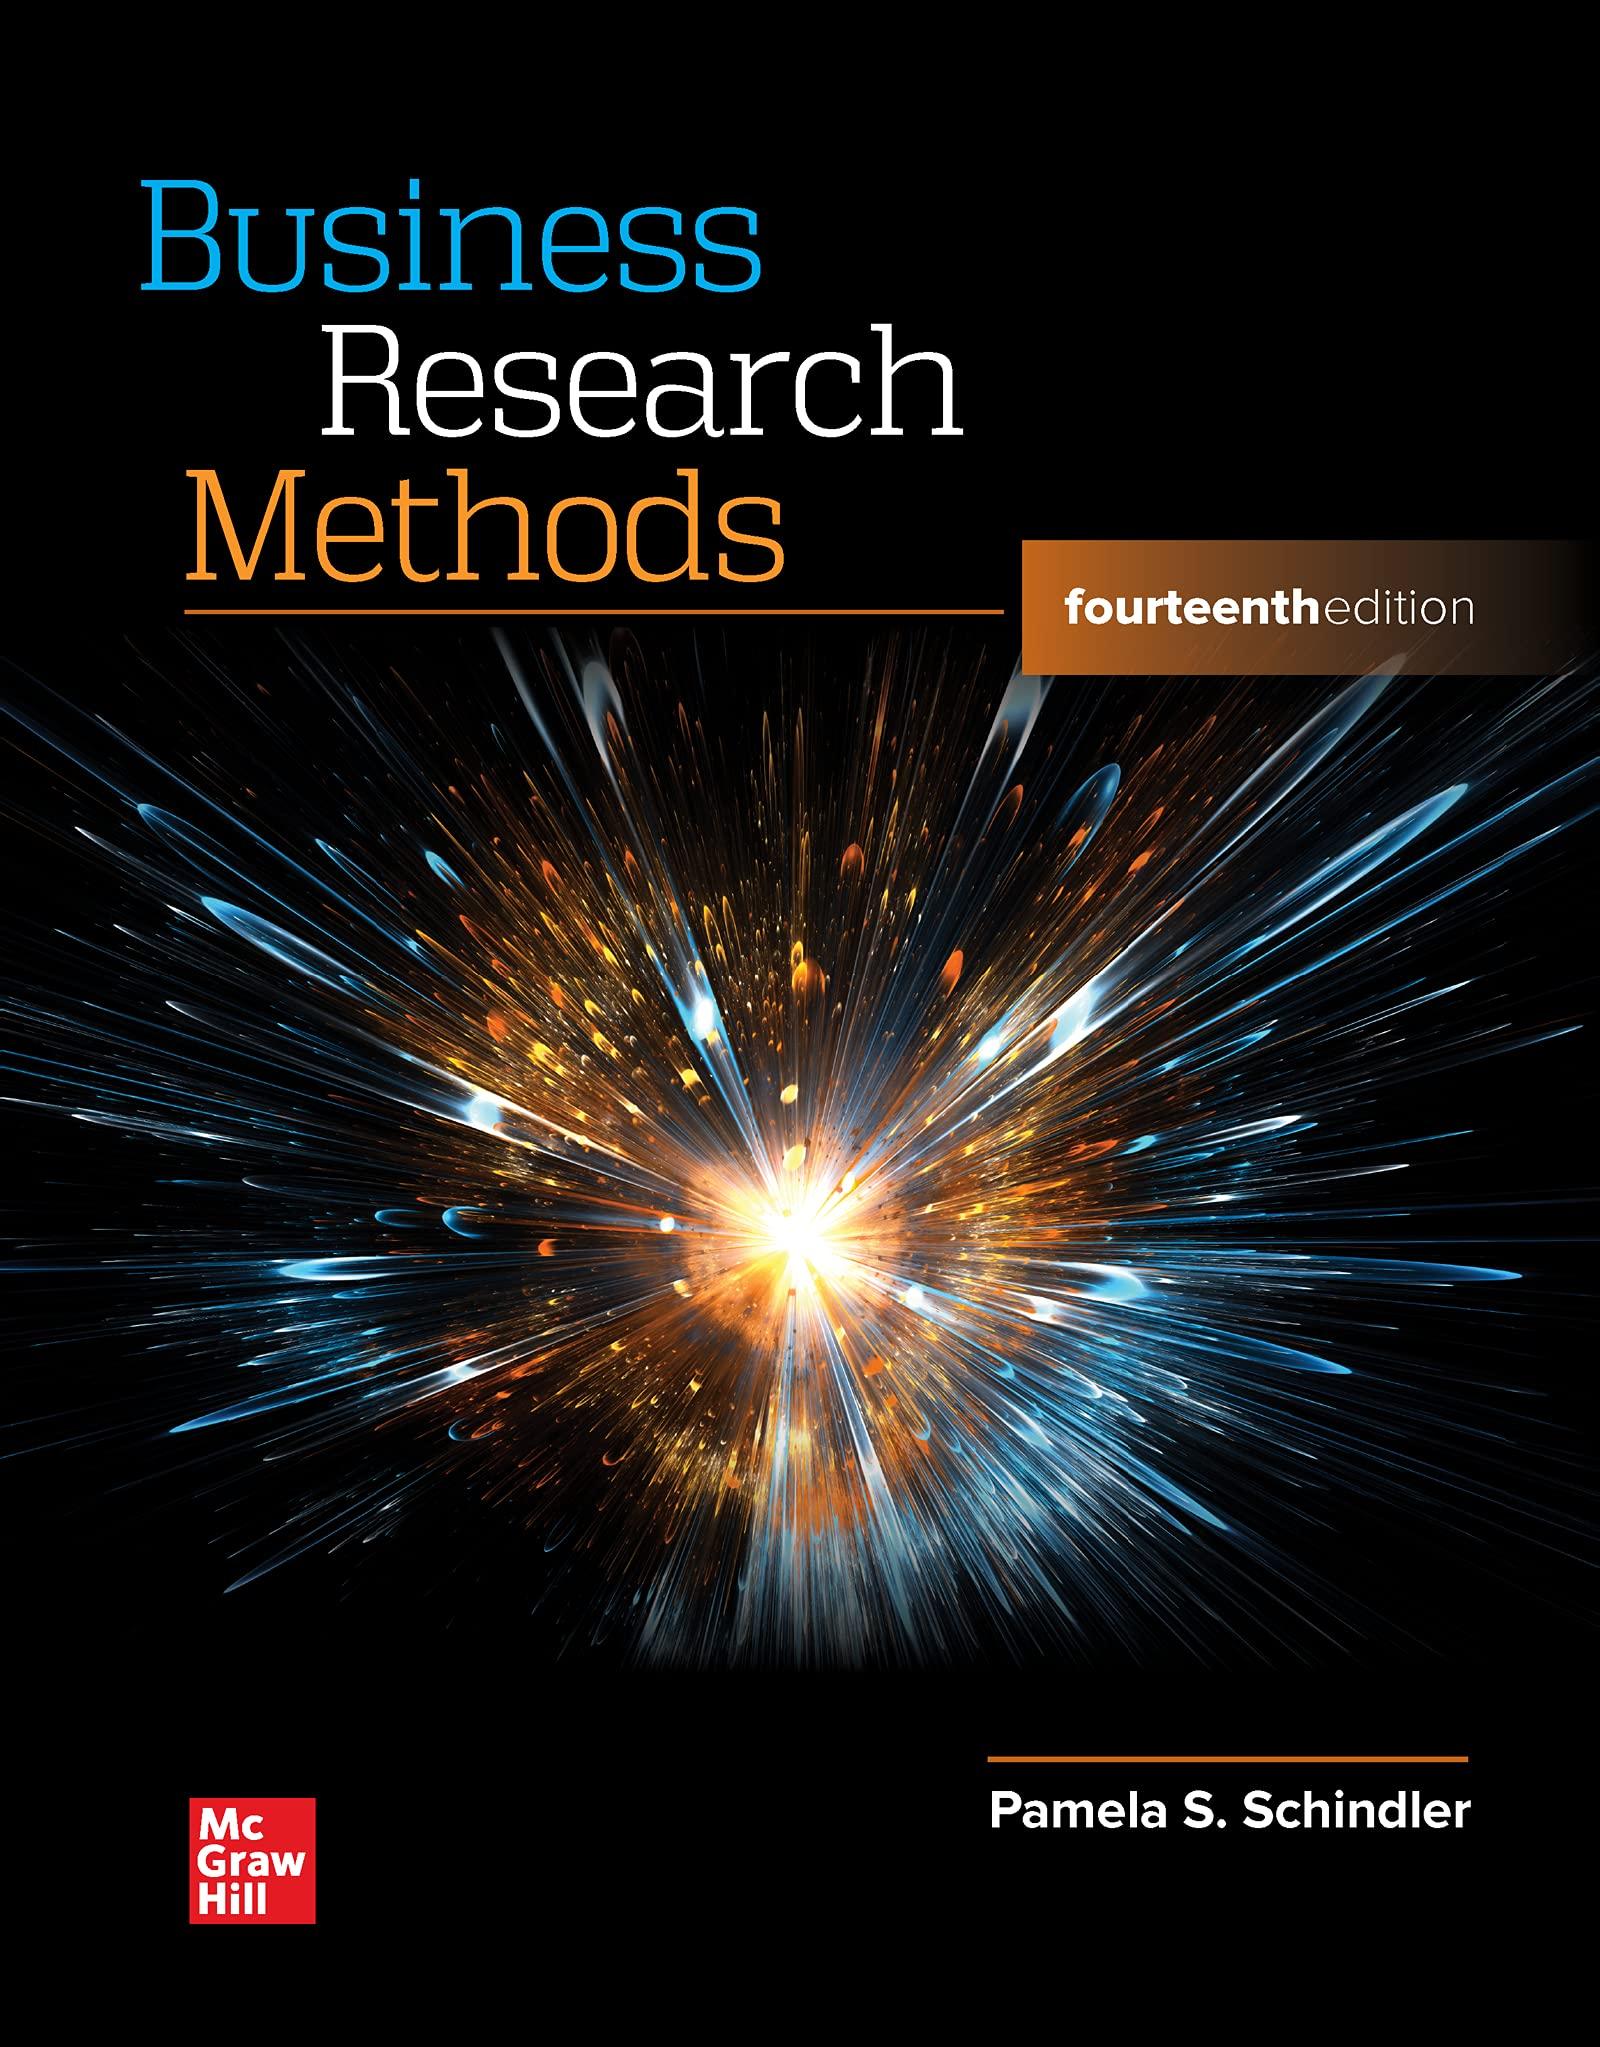 business research methods 14th edition pamela schindler 1260733726, 9781260733723